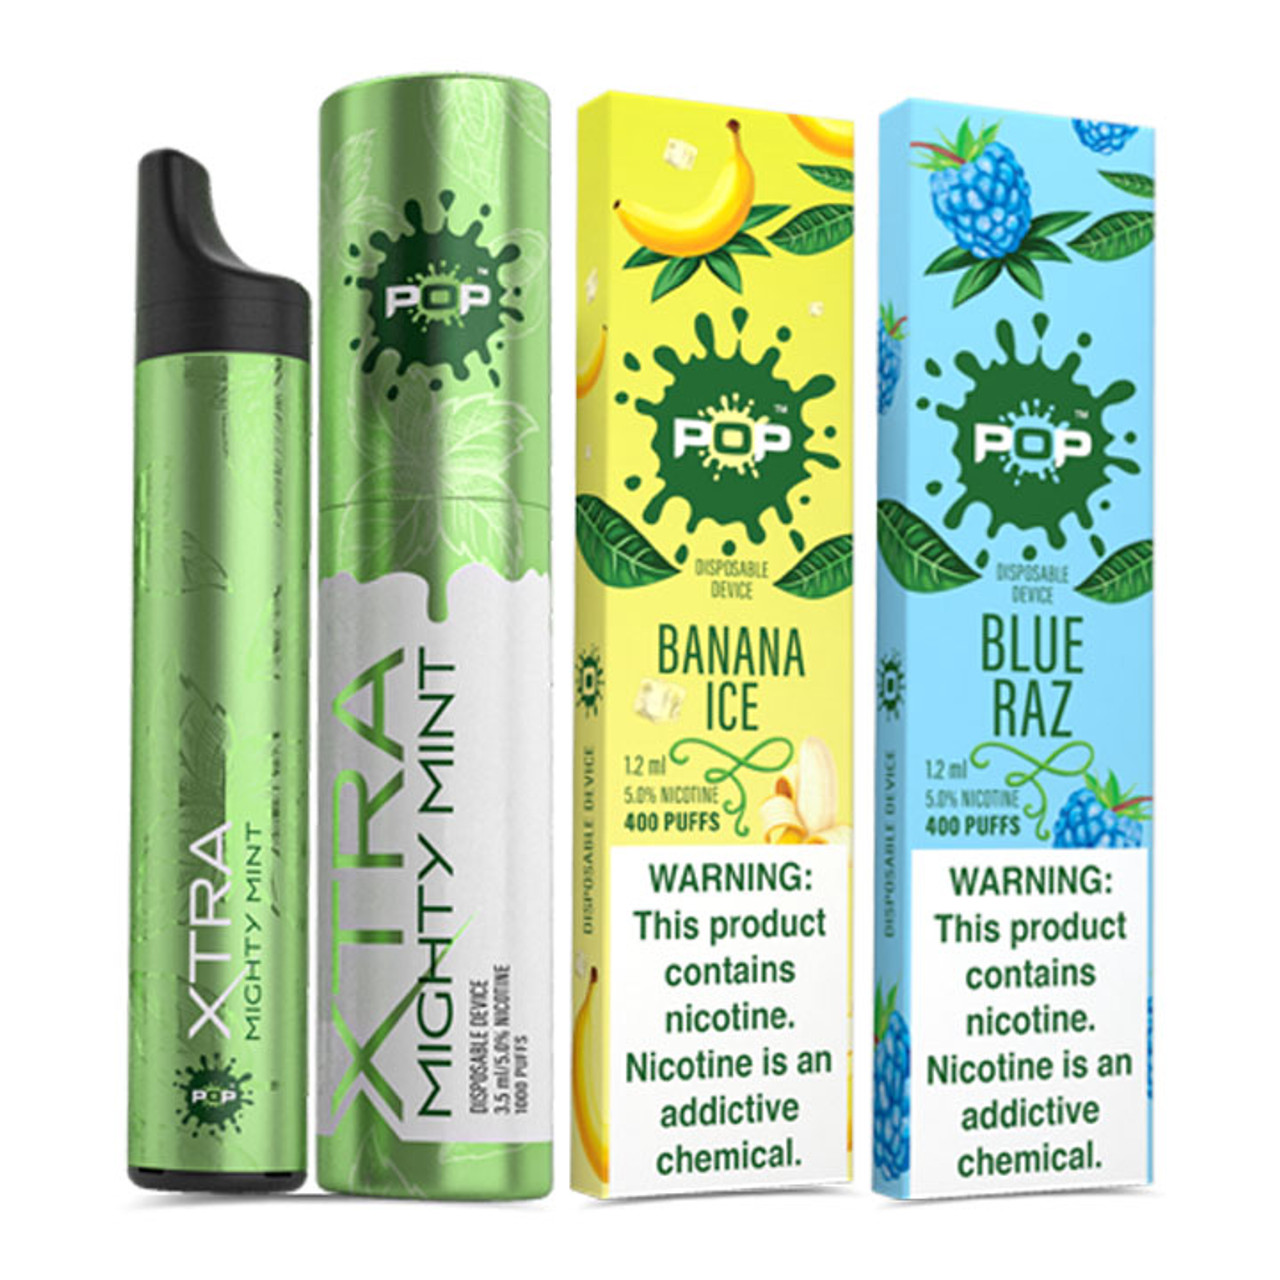 Pop Xtra 5 1000 Puff Disposable Device